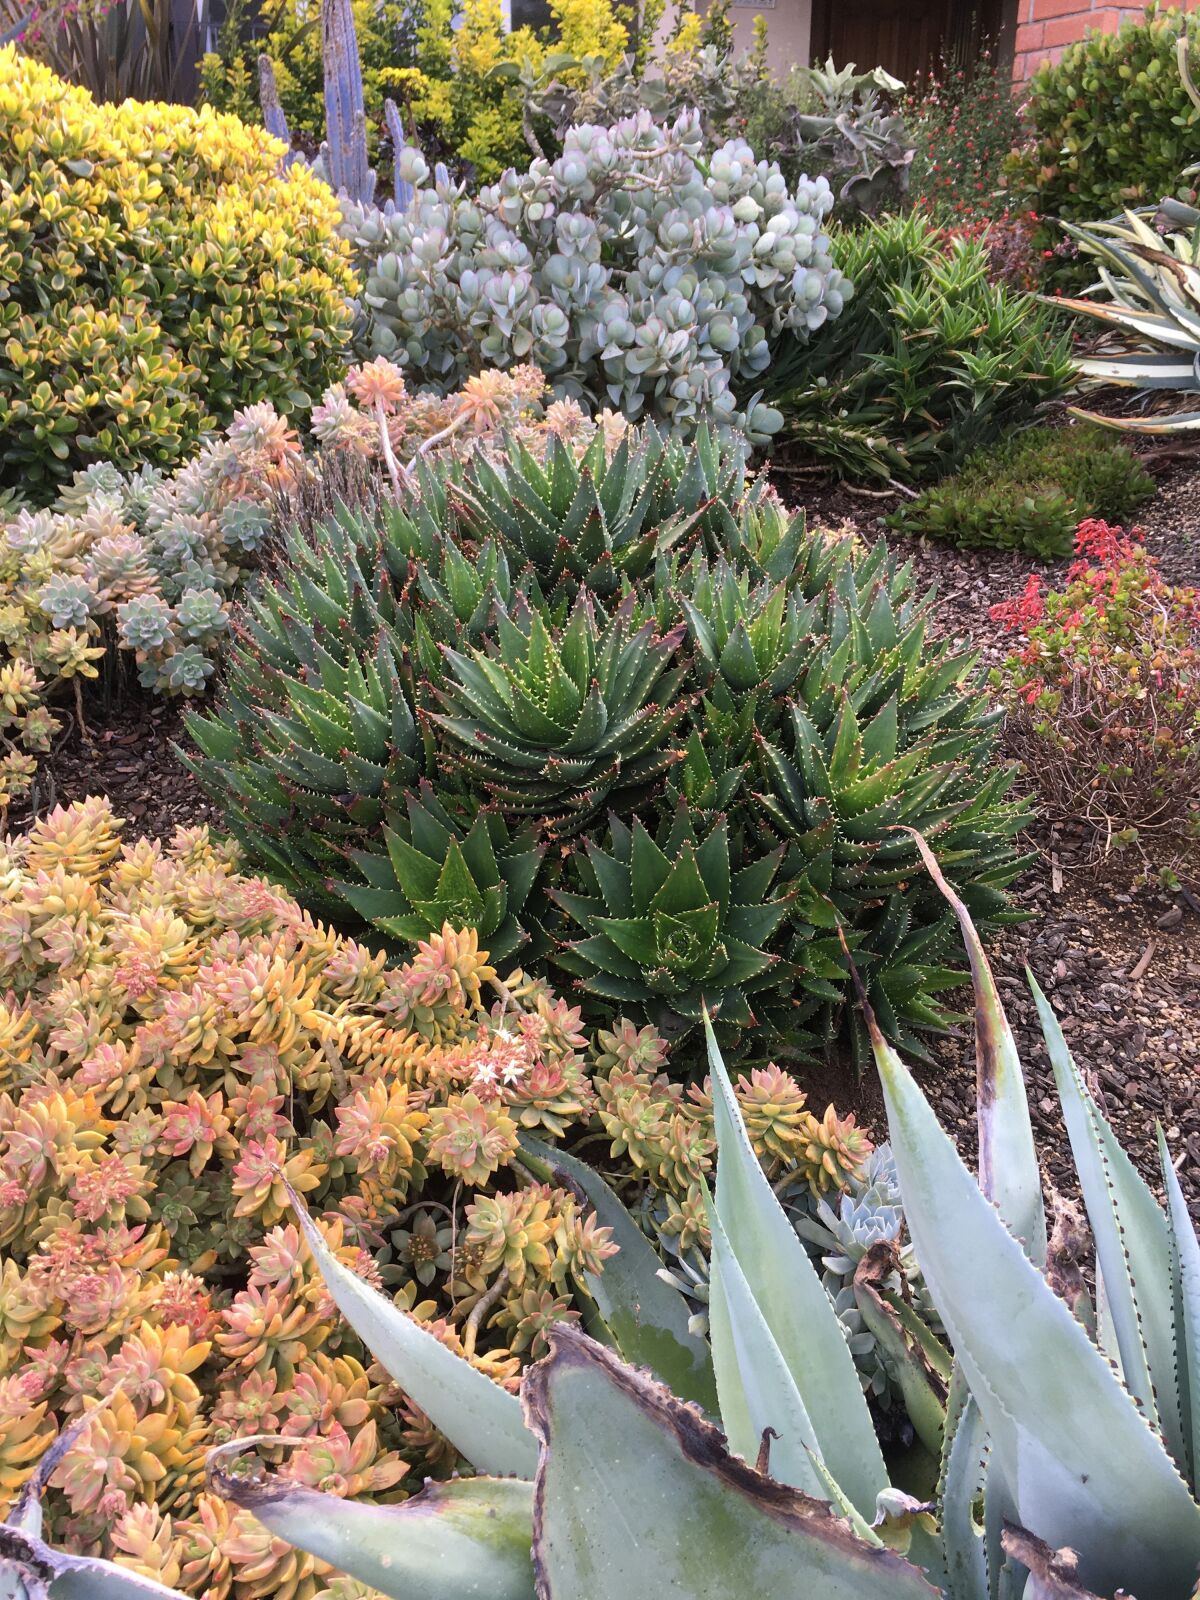 The Brants used many shapes and varieties of succulents, with pops of color throughout.